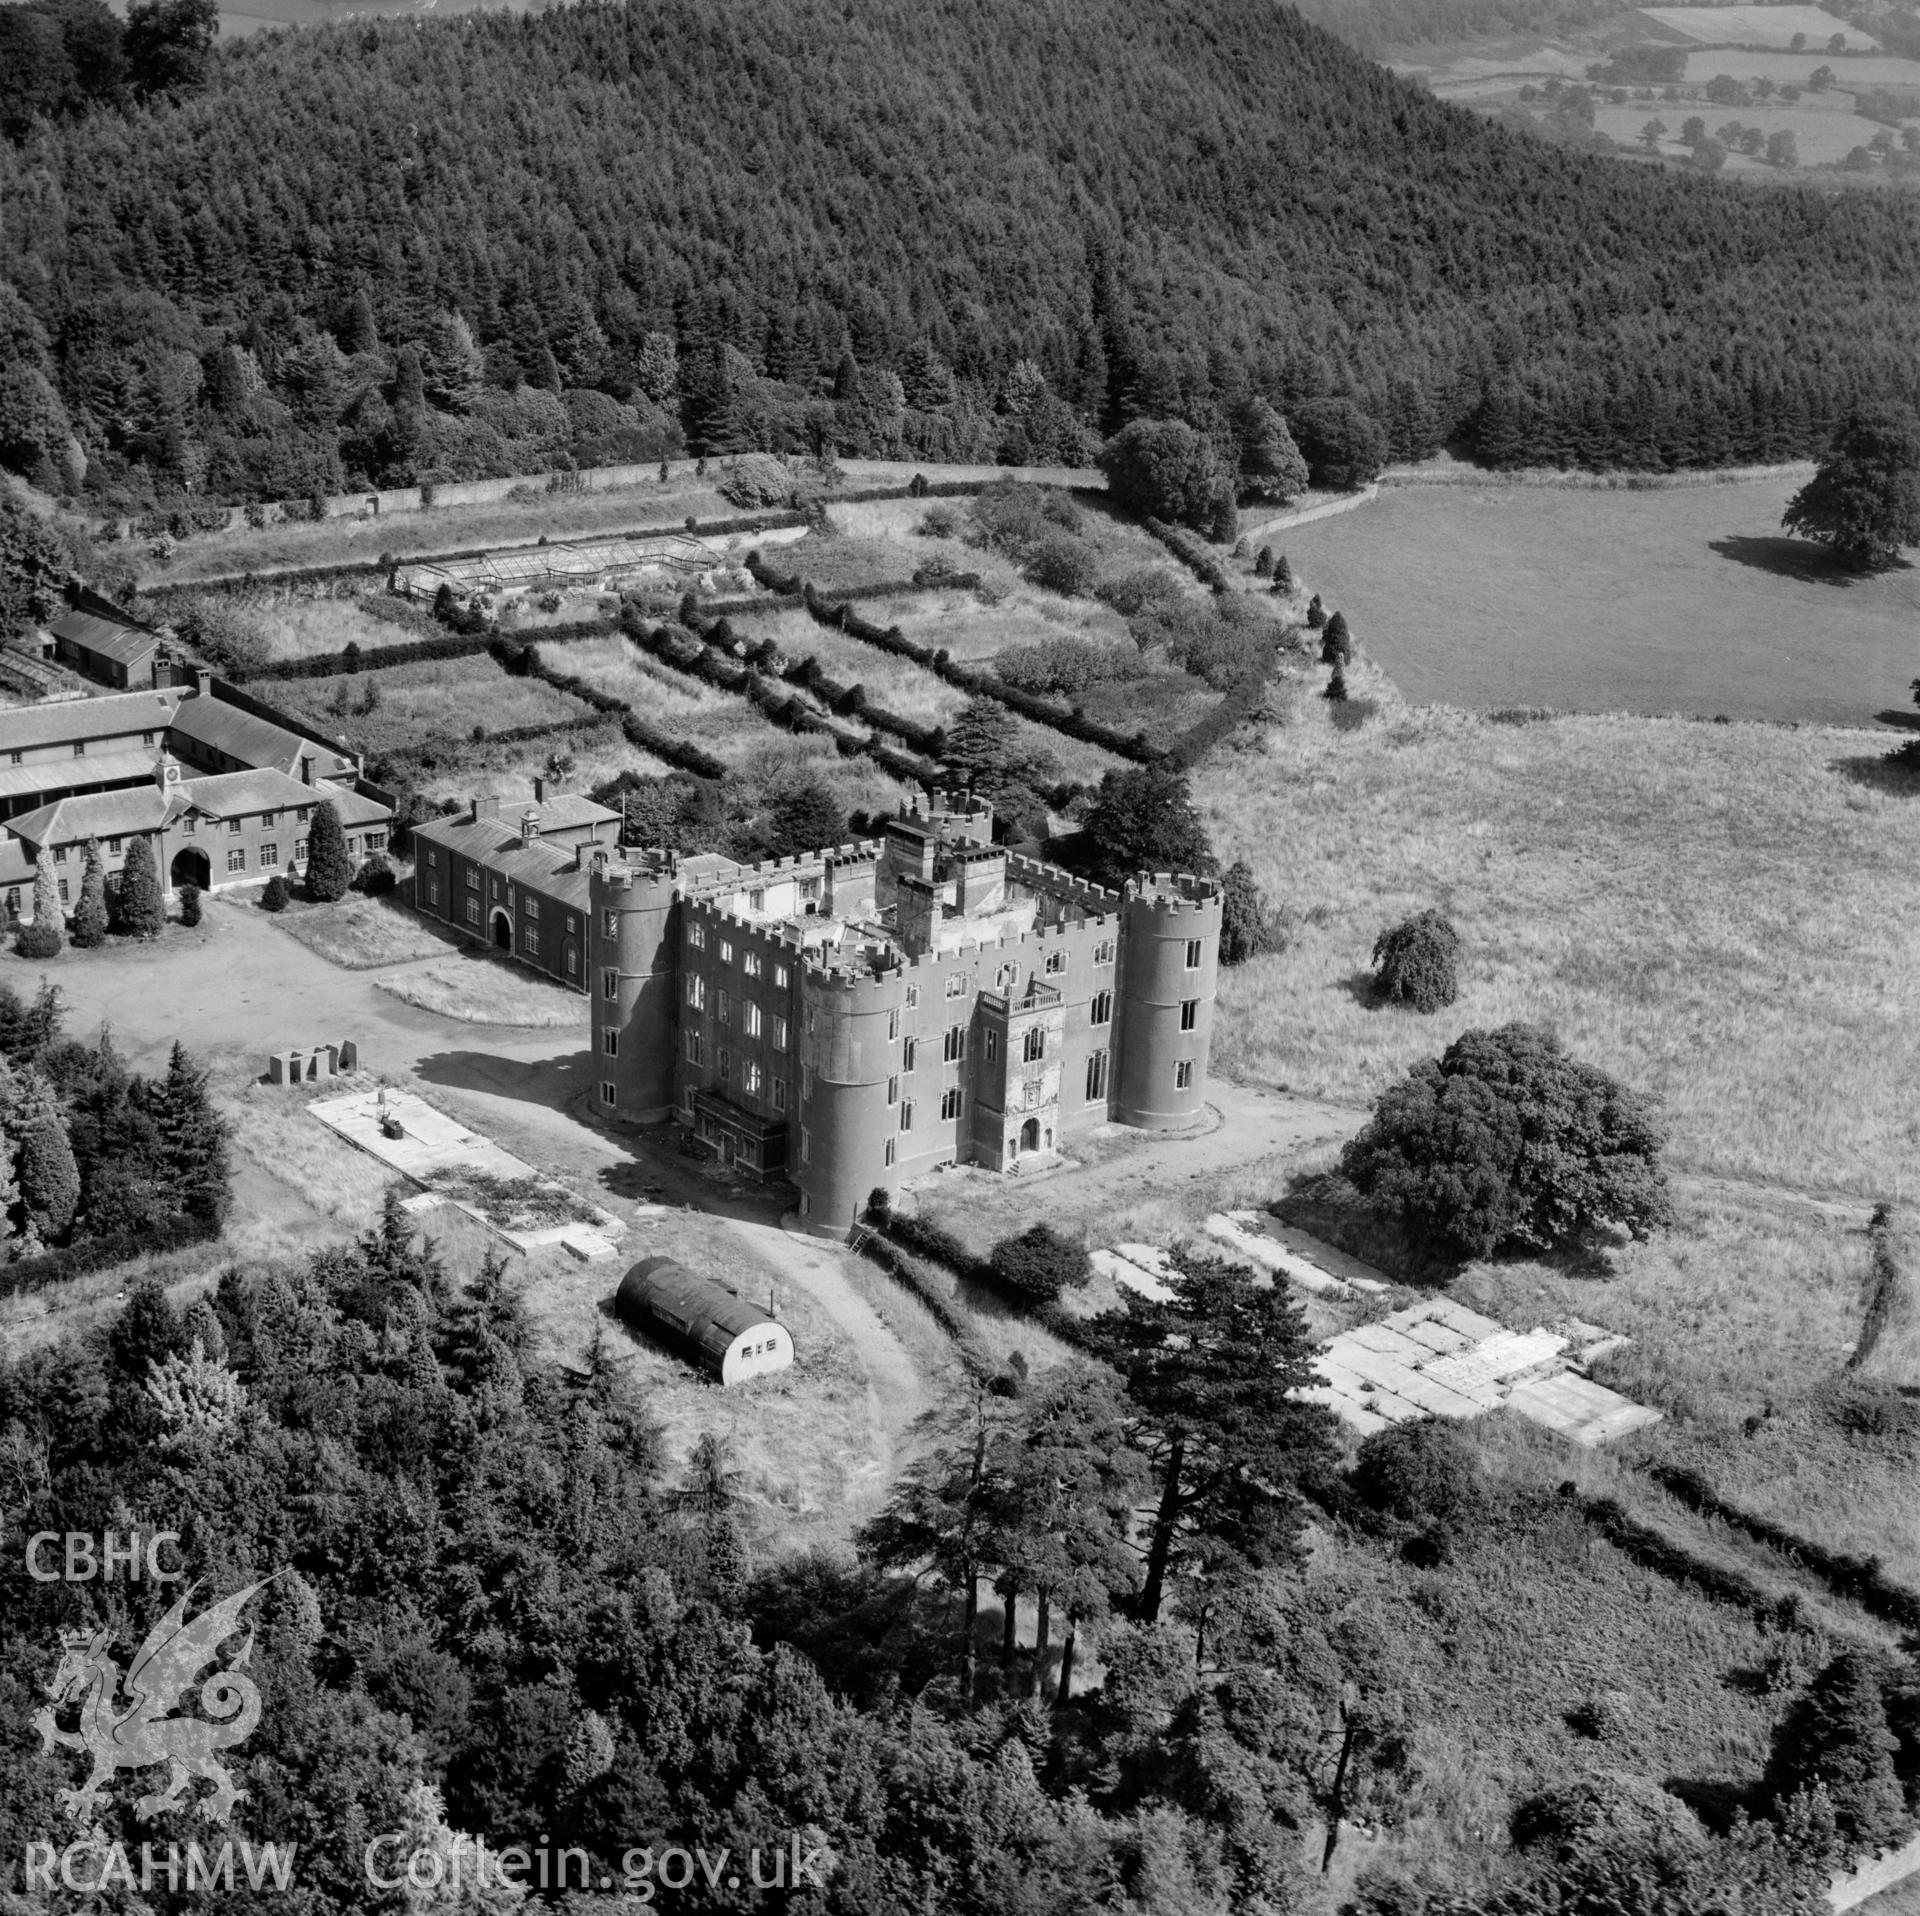 View of Ruperra castle showing damage caused by the fire in 1942 and wartime structures